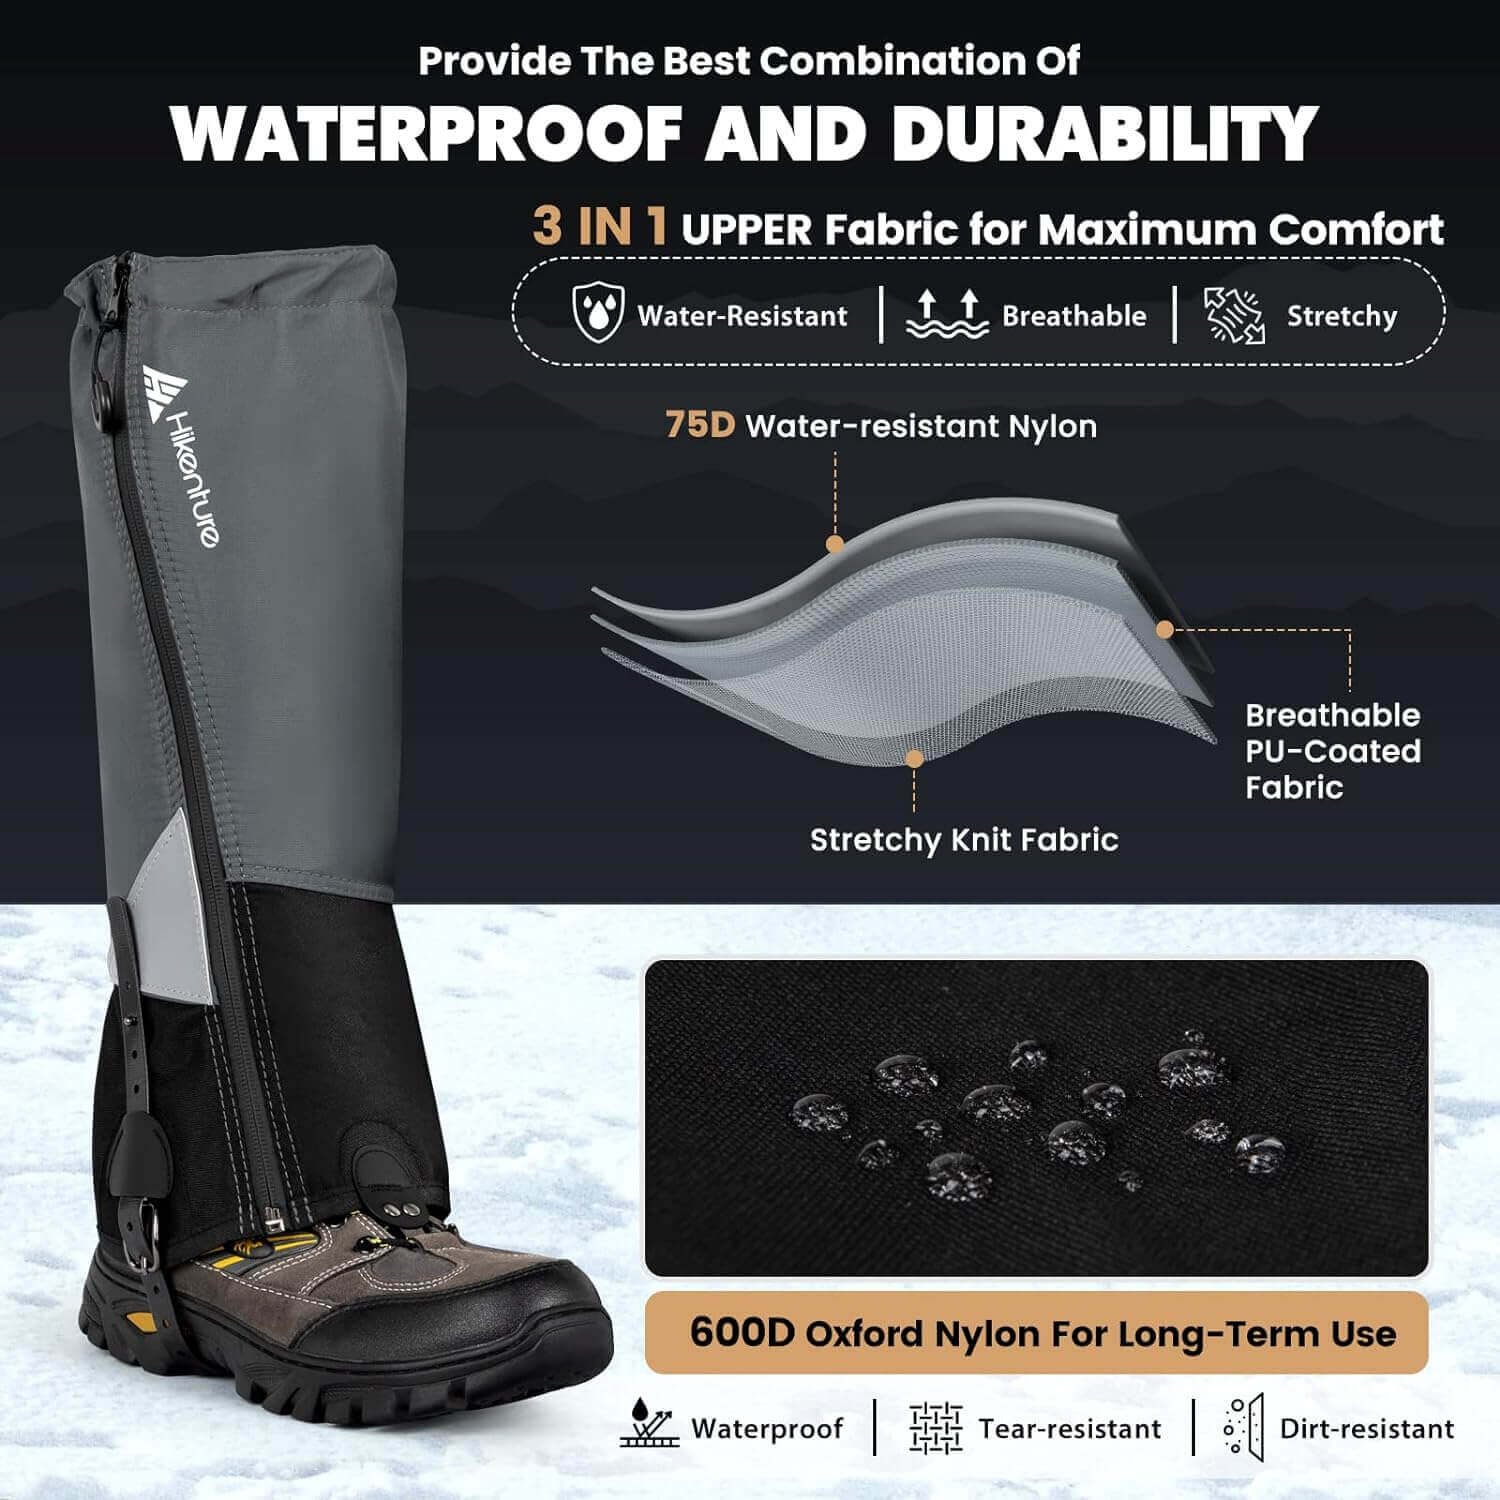 Shop The Latest >Hiking Waterproof, Leg Gaiters with Upgraded Zipper Design > *Only $33.74*> From The Top Brand > *Hikenturel* > Shop Now and Get Free Shipping On Orders Over $45.00 >*Shop Earth Foot*